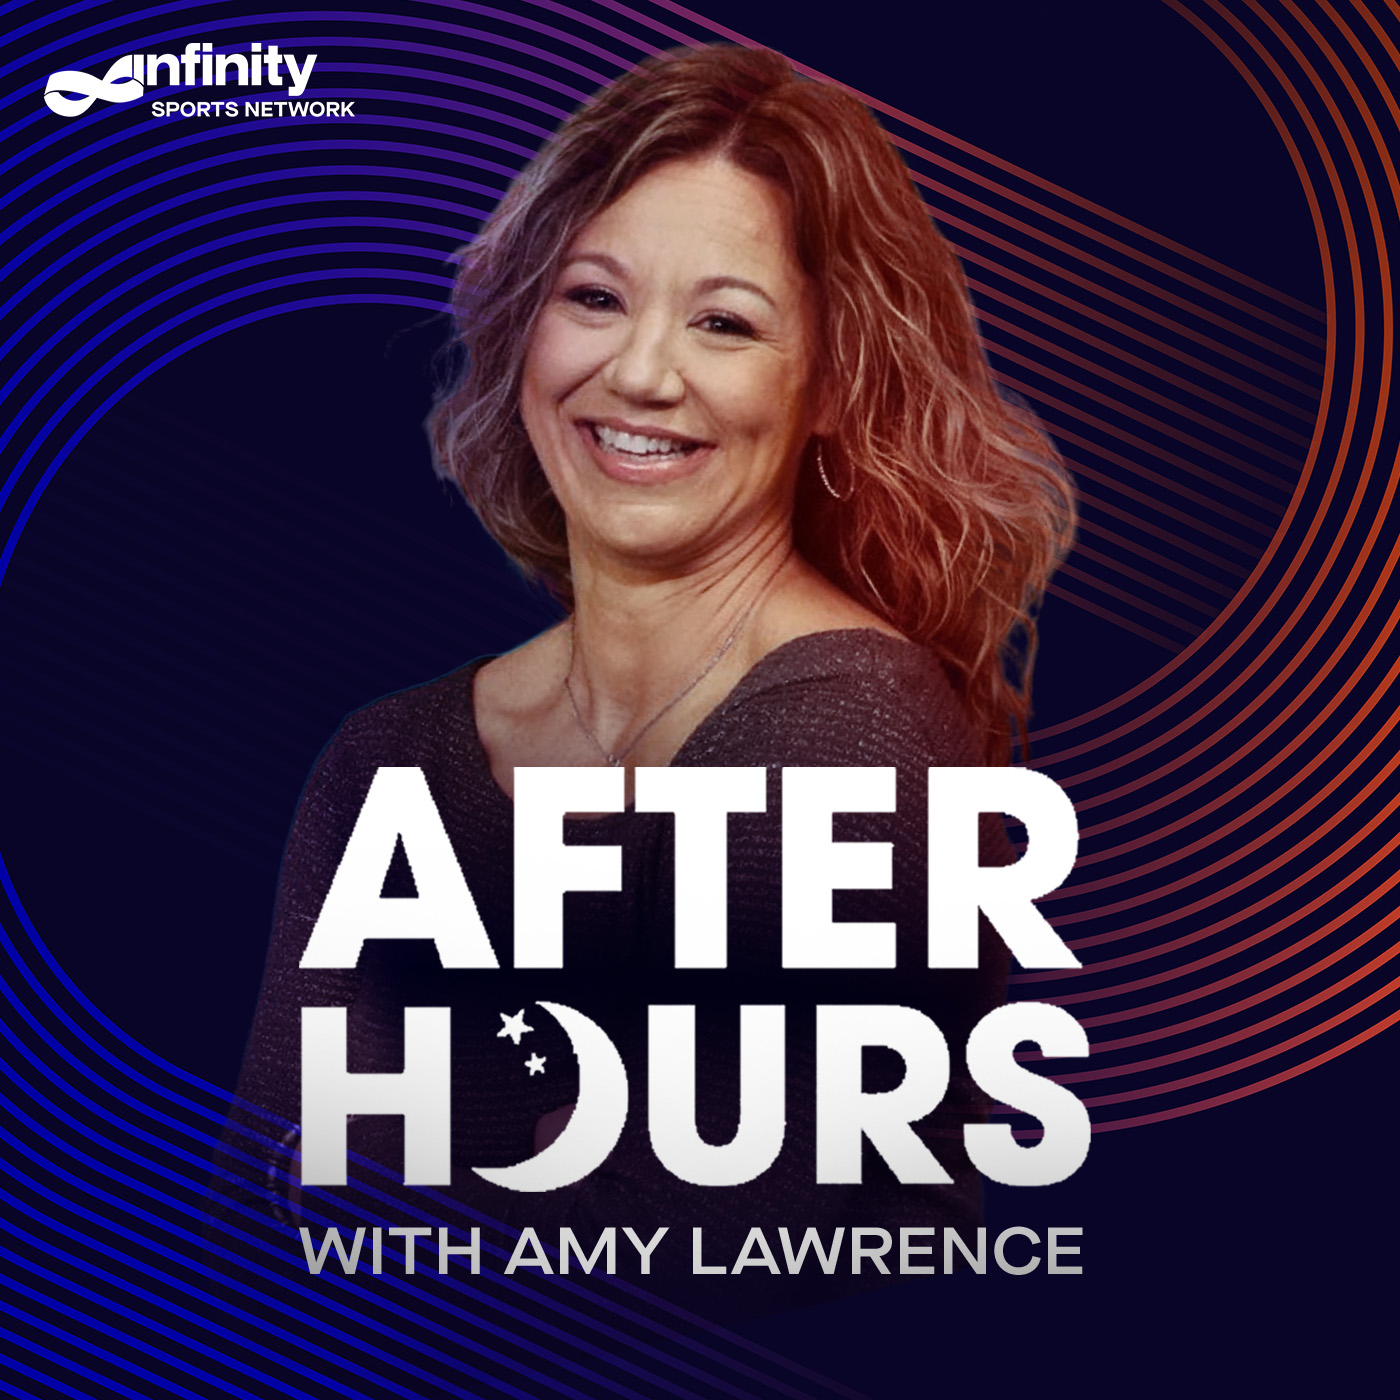 6/3/21 After Hours with Amy Lawrence PODCAST: Hour 3